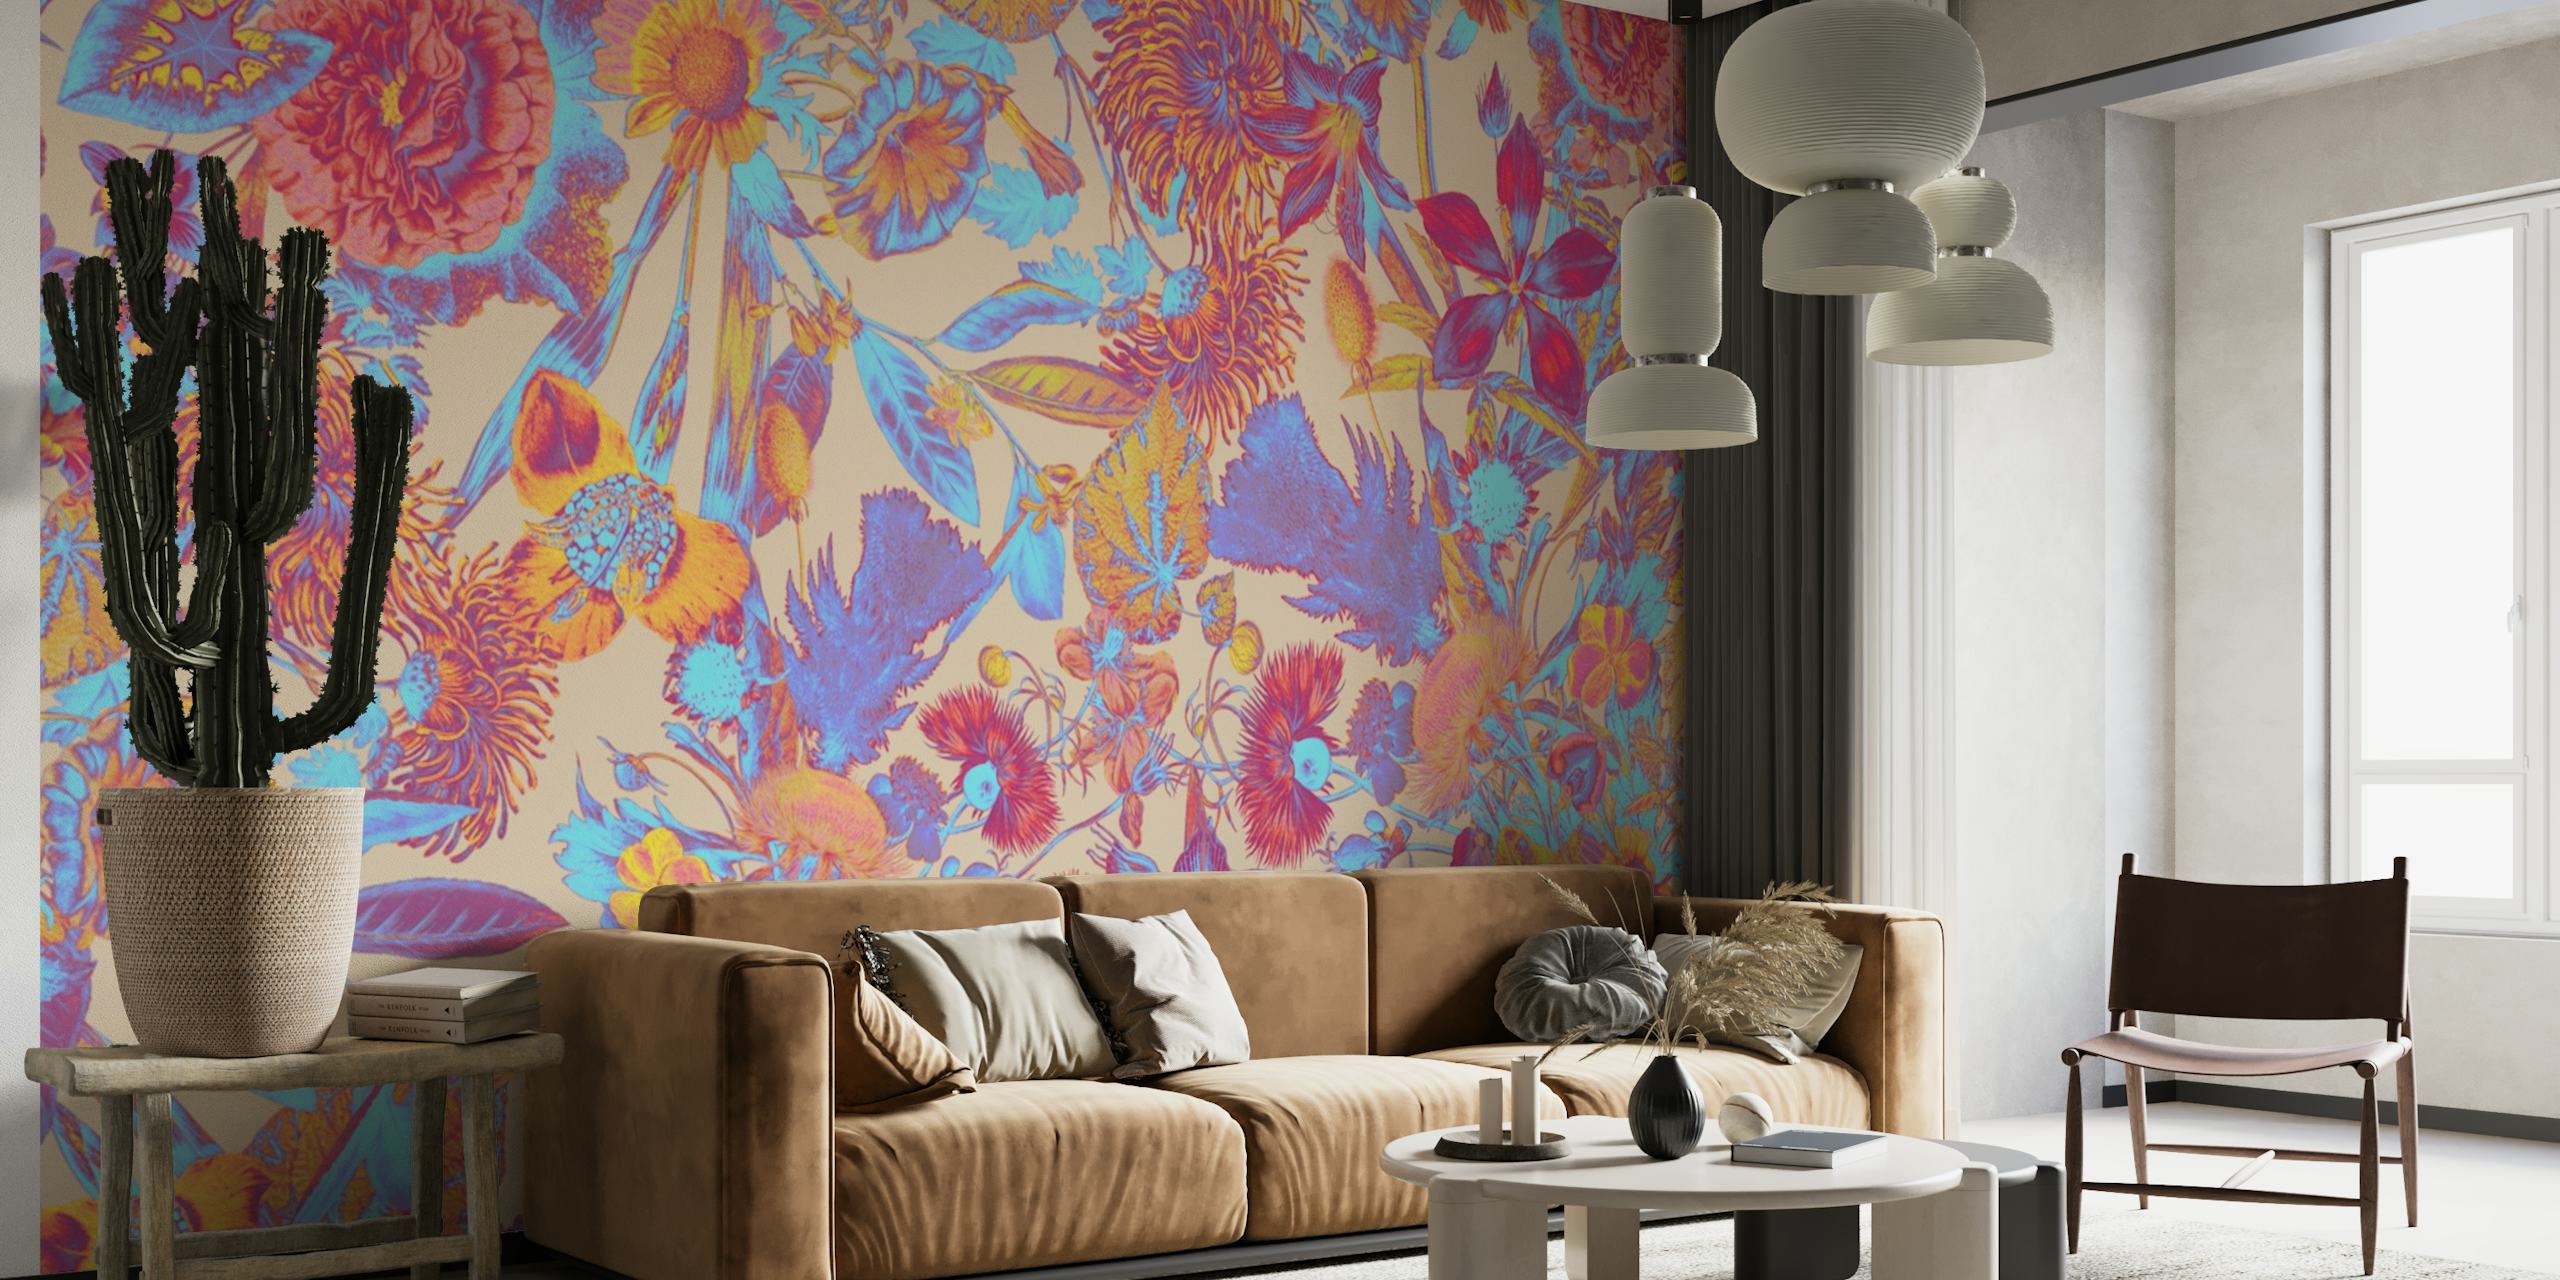 A brightly colored wall mural with a complex multicolor floral pattern.